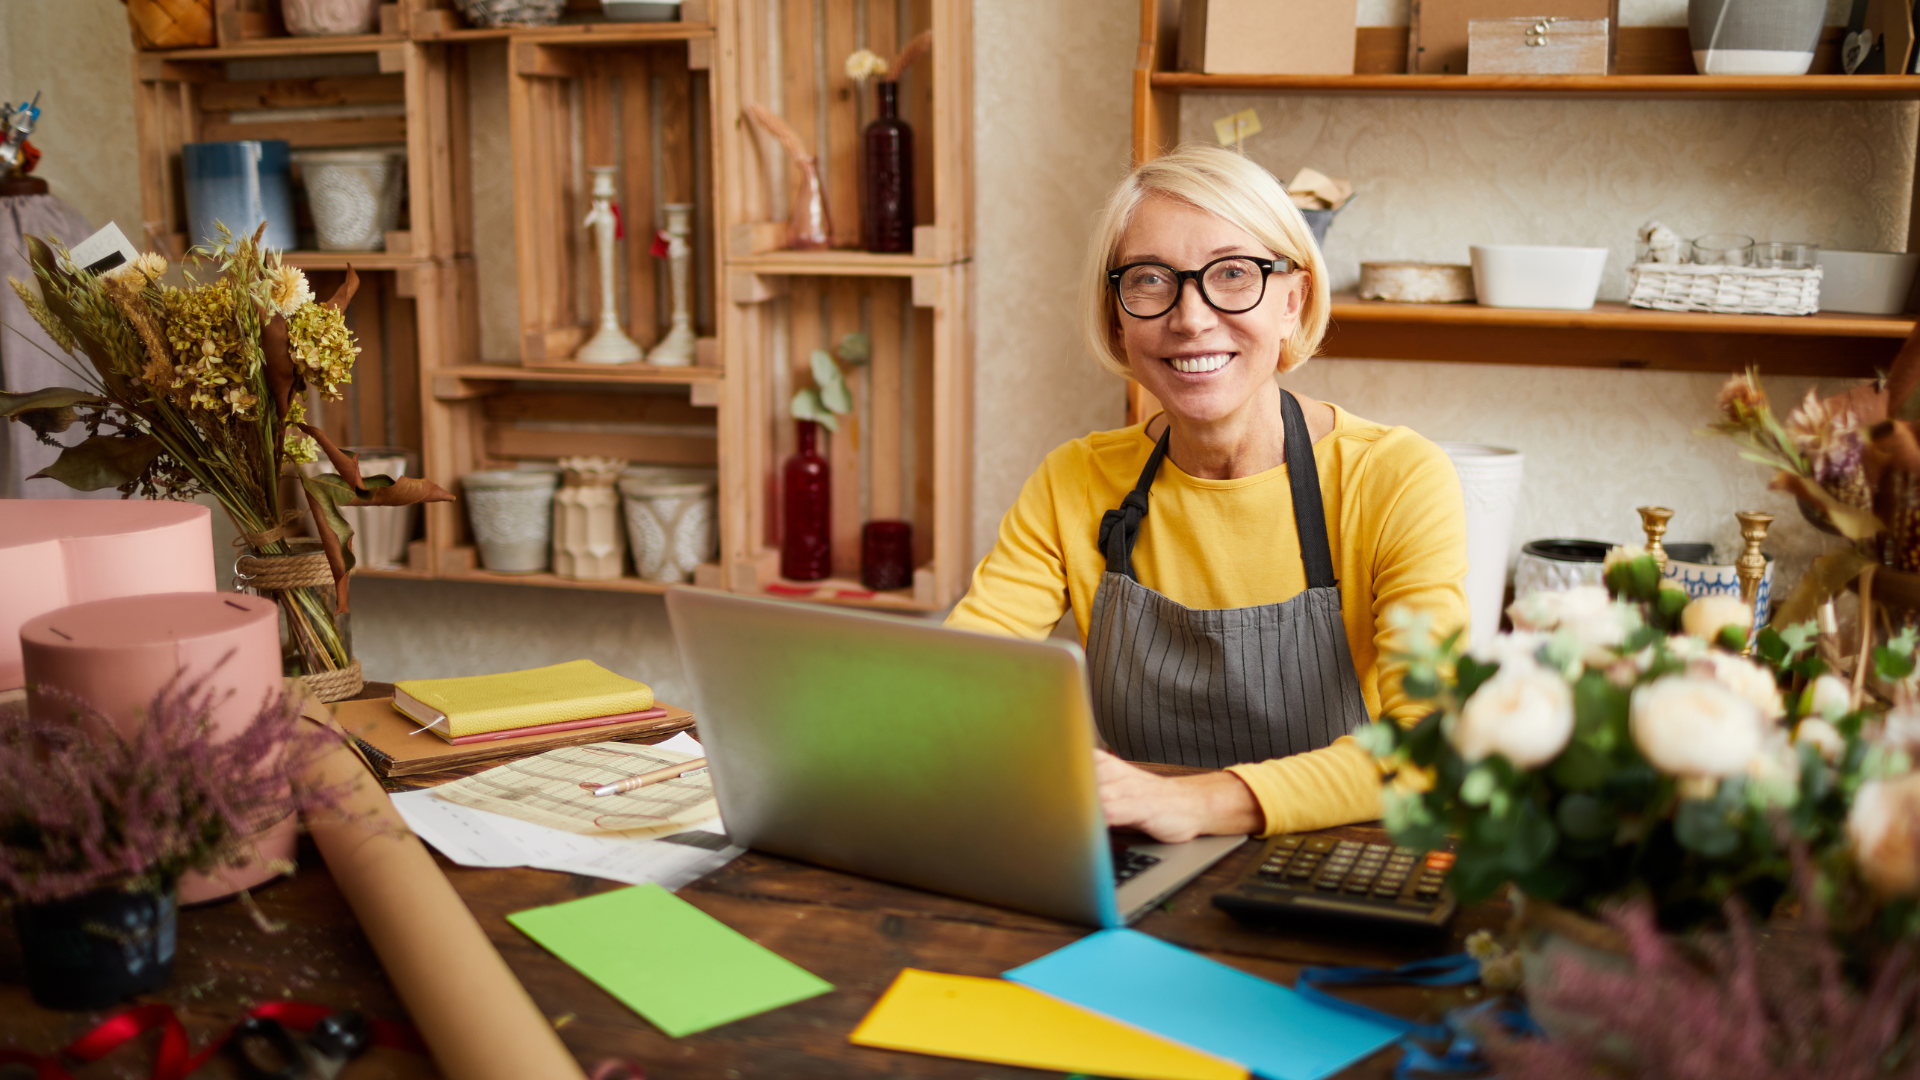 7 Ideas For Your Small Business Marketing That Work